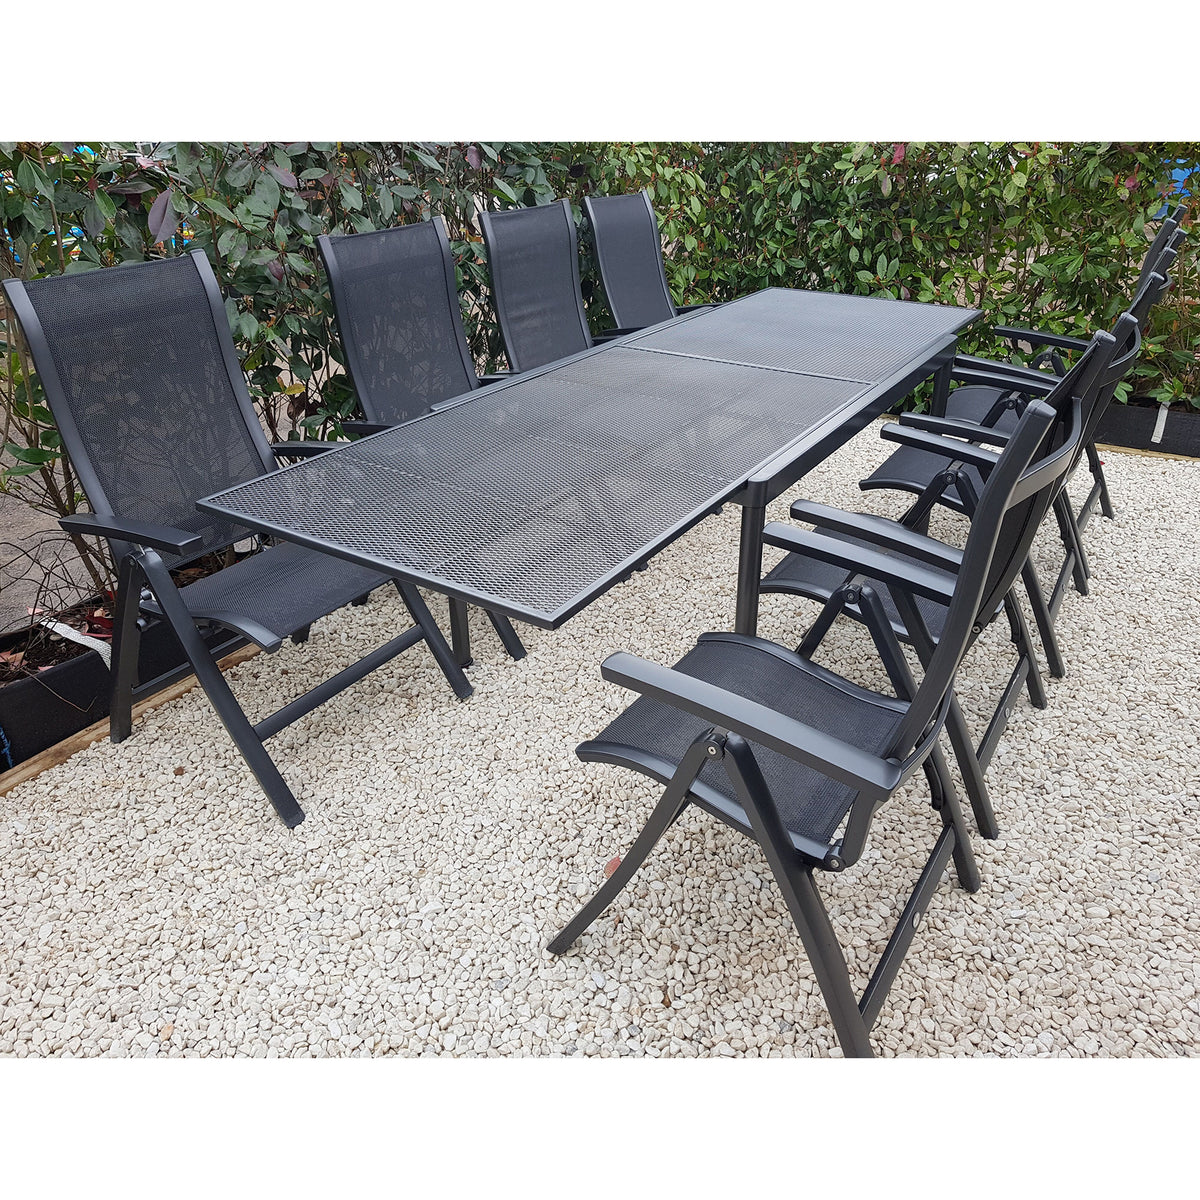 Alexander Rose Portofino 8 Seater Metal Garden Furniture Set with Extending Table &amp; Recliner Chairs